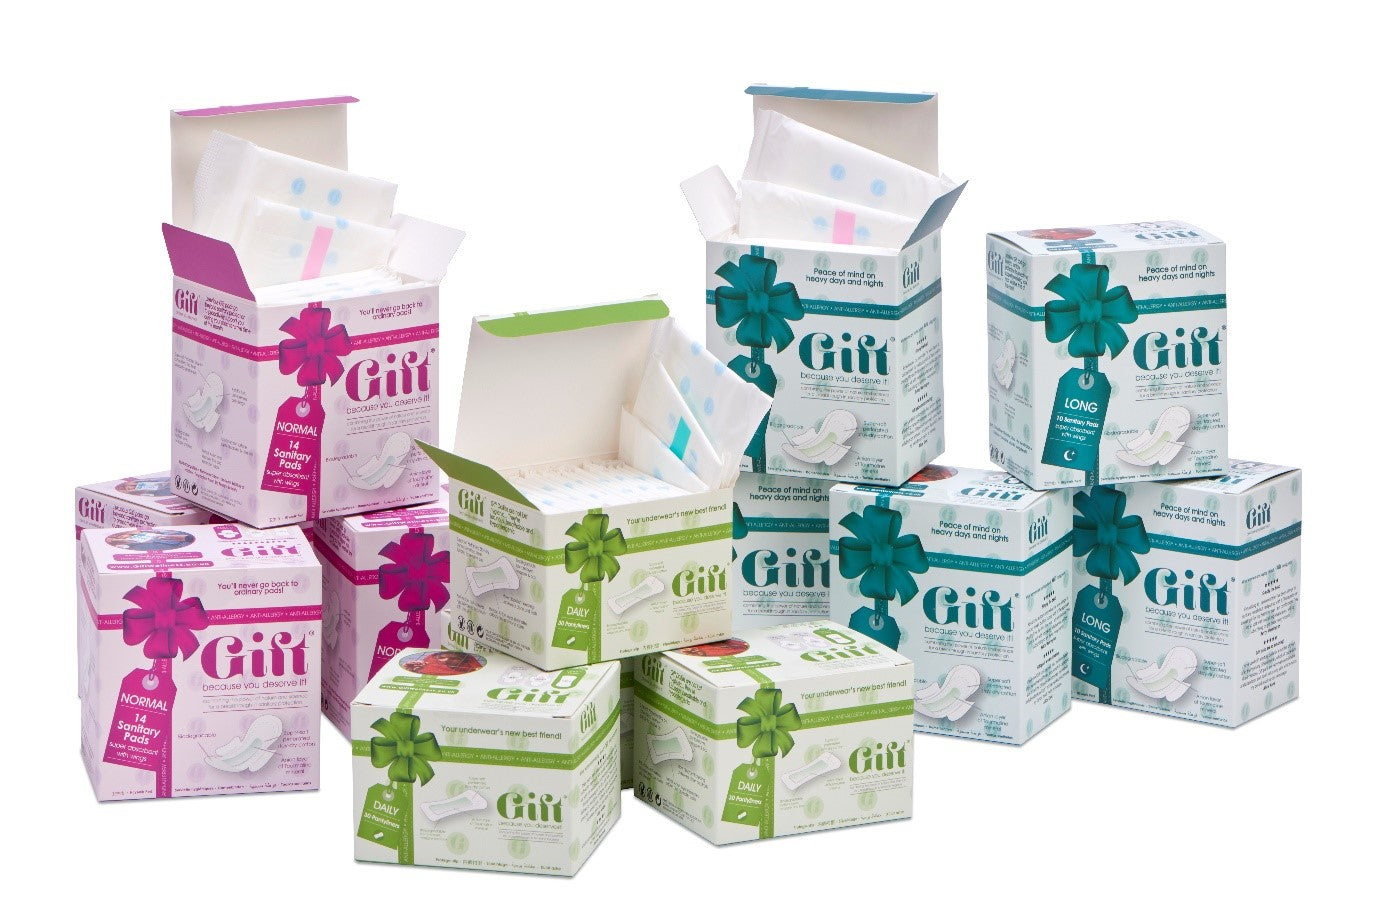 GIFT Long Anion Sanitary Pads with wings - 10 Pads * New Improved Biodegradable Design - giftwellness